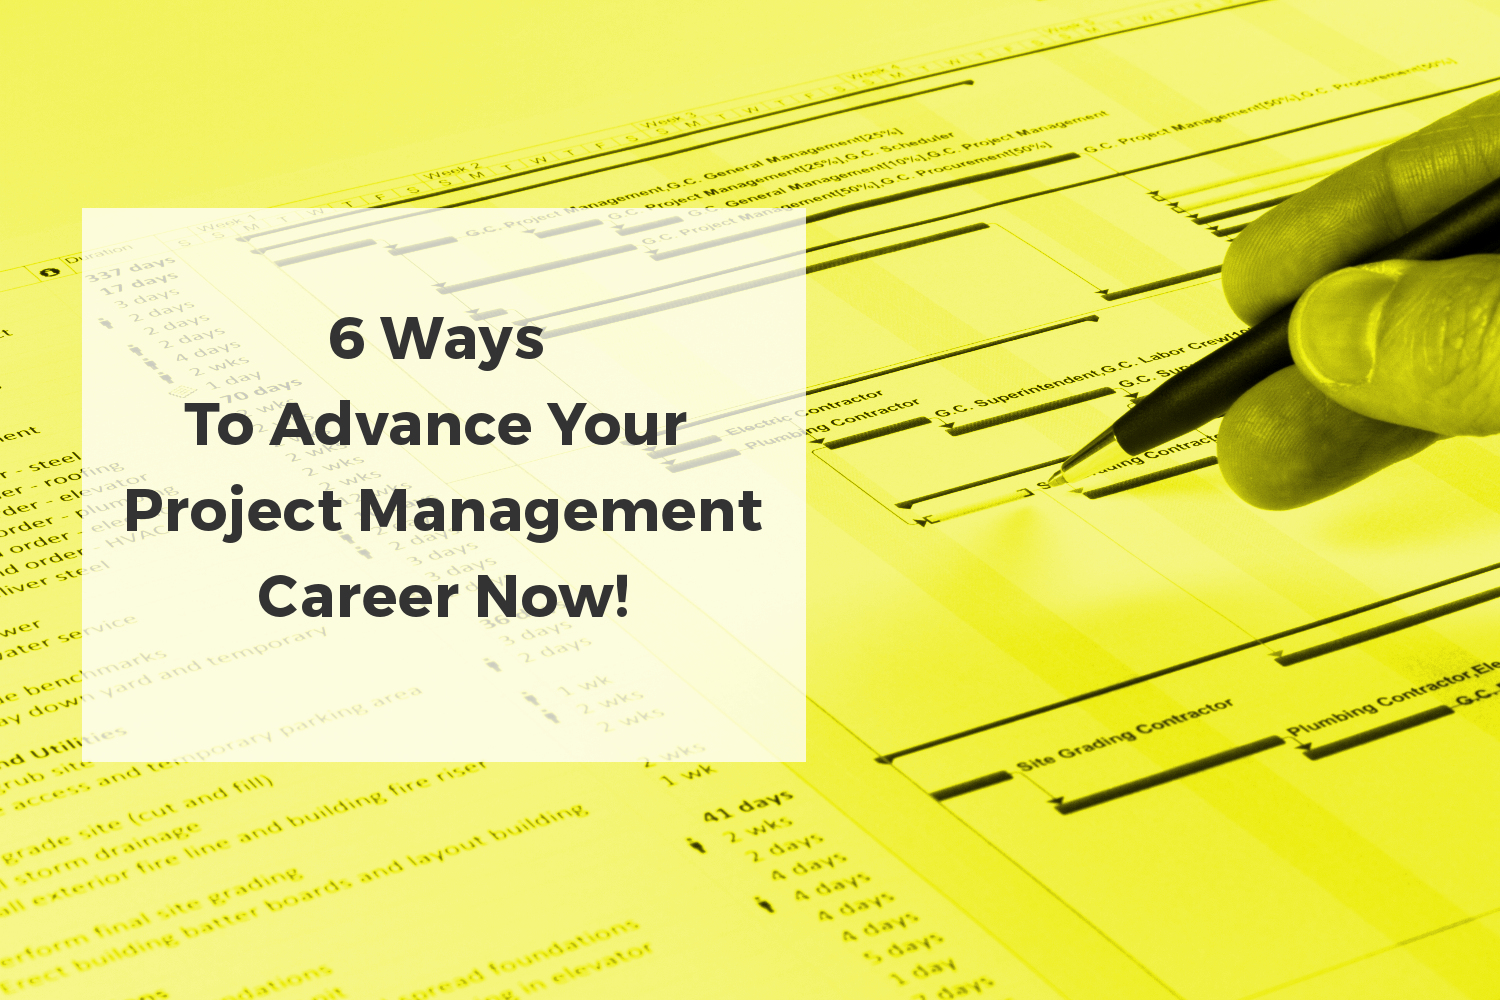 6 Ways to Advance Your Project Management Career Now - Image 1